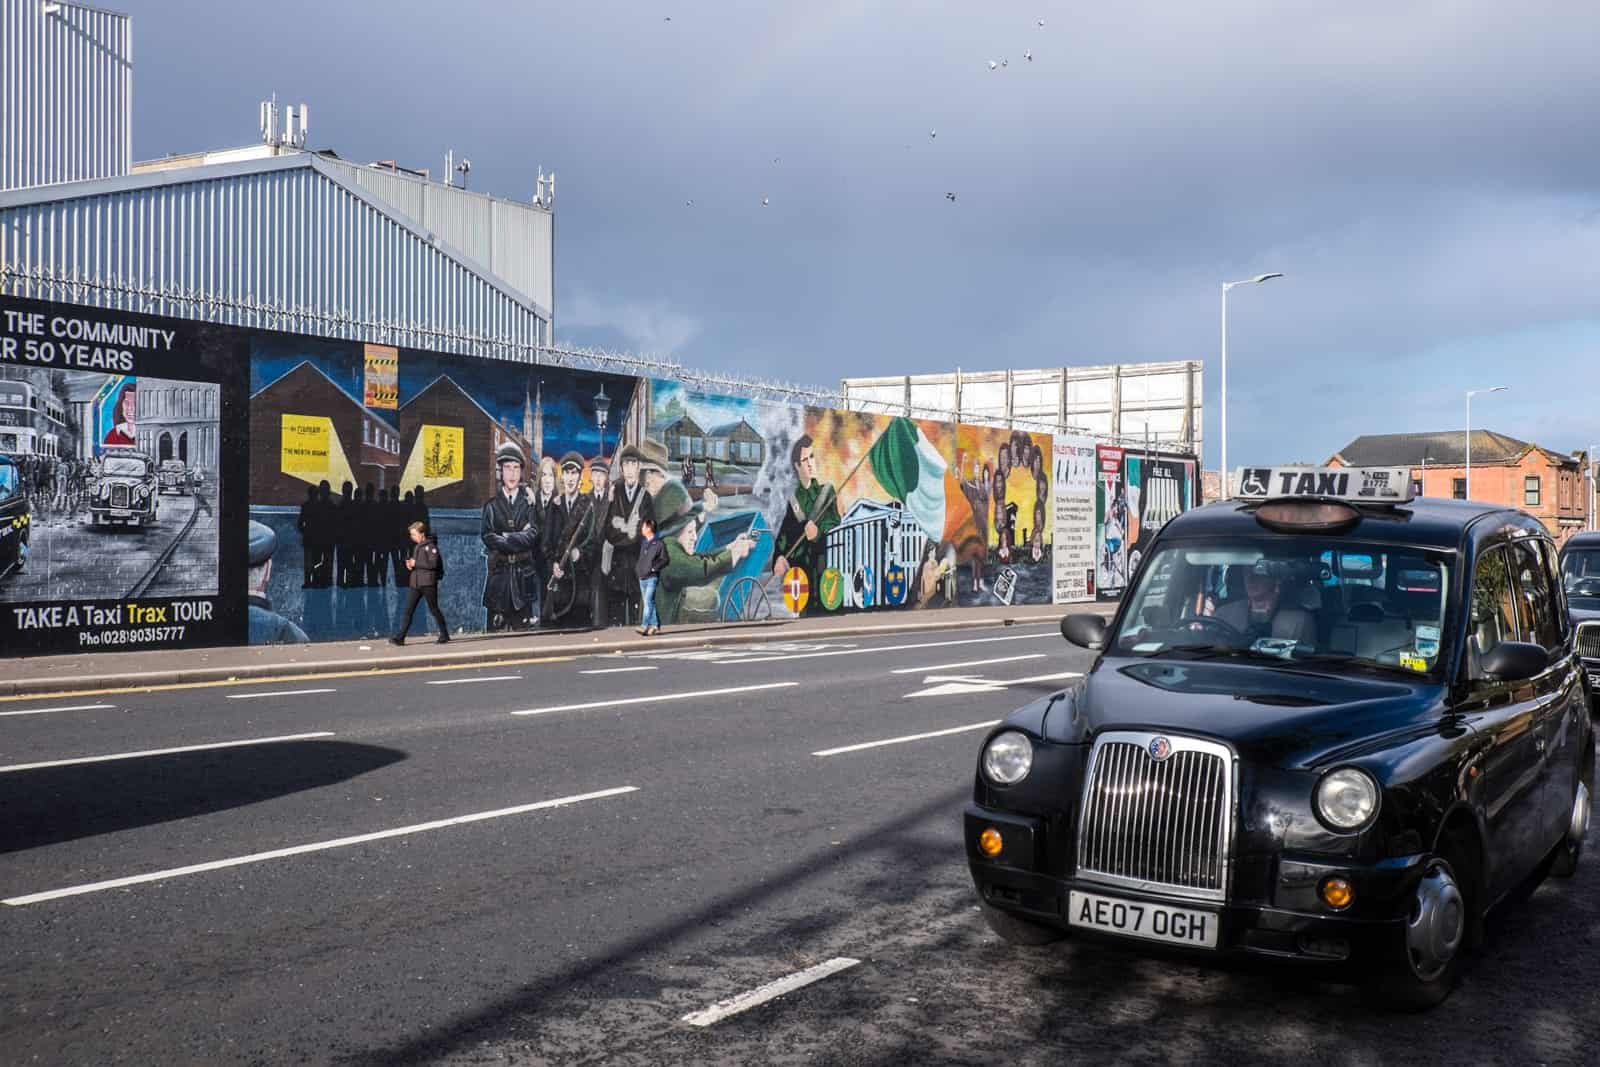 The political Belfast Black Taxi Tour is a popular thing to do